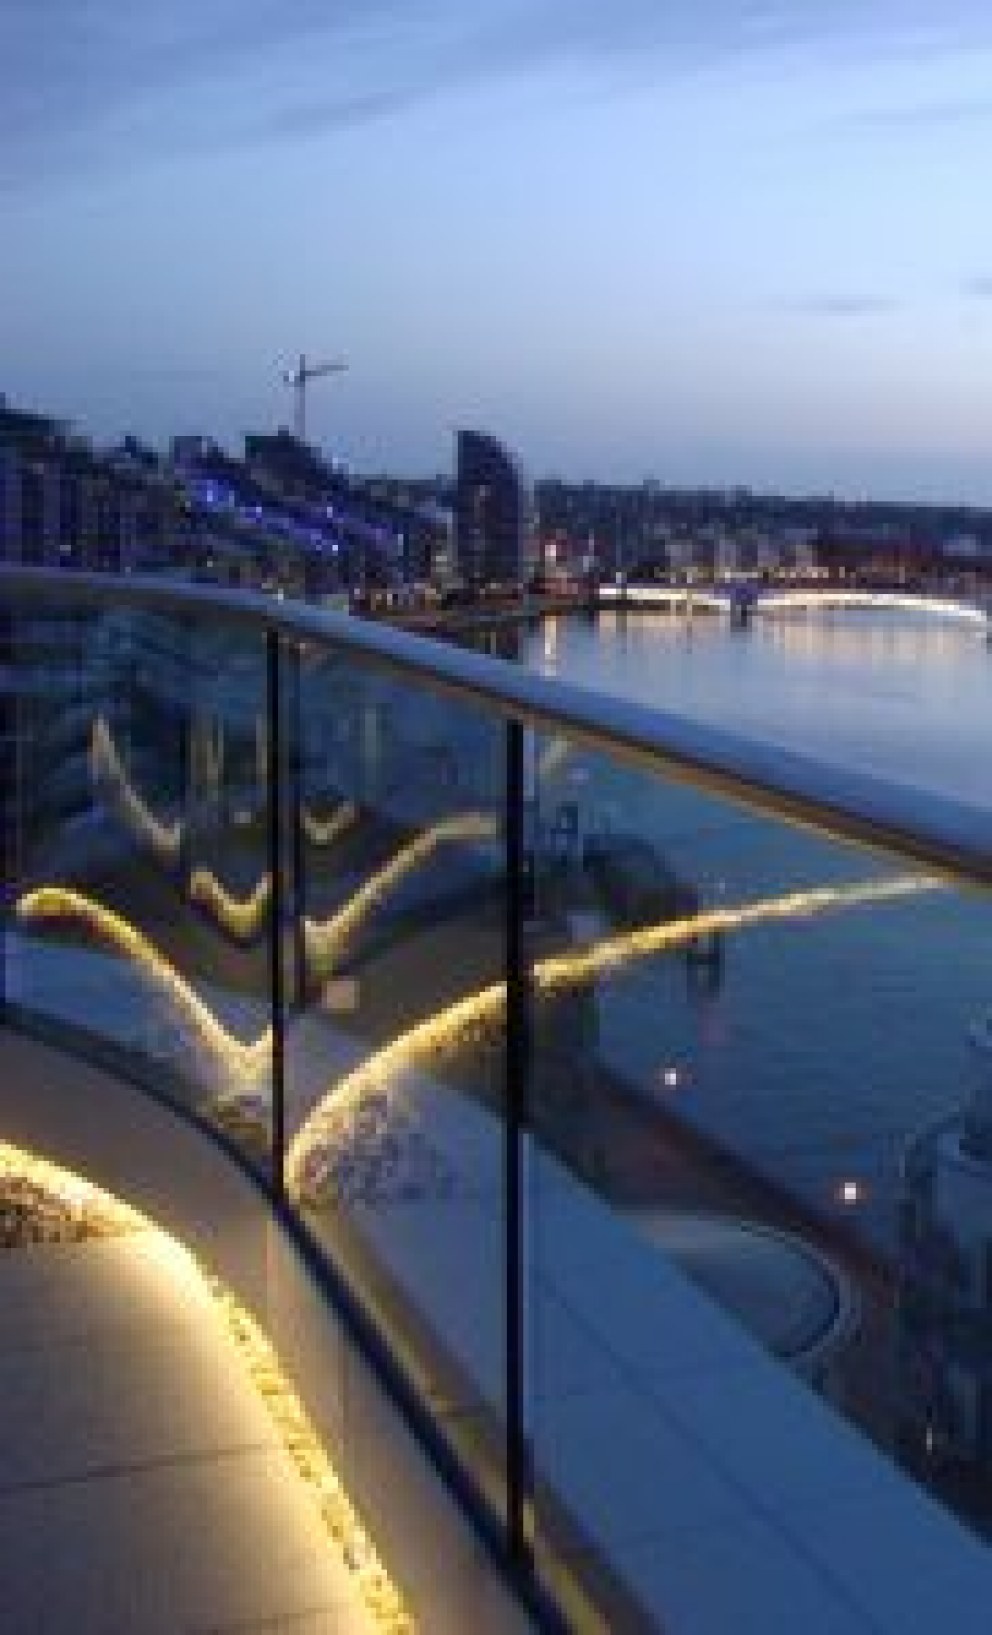 Penthouse | LED remote control lighting systems | Interior Designers